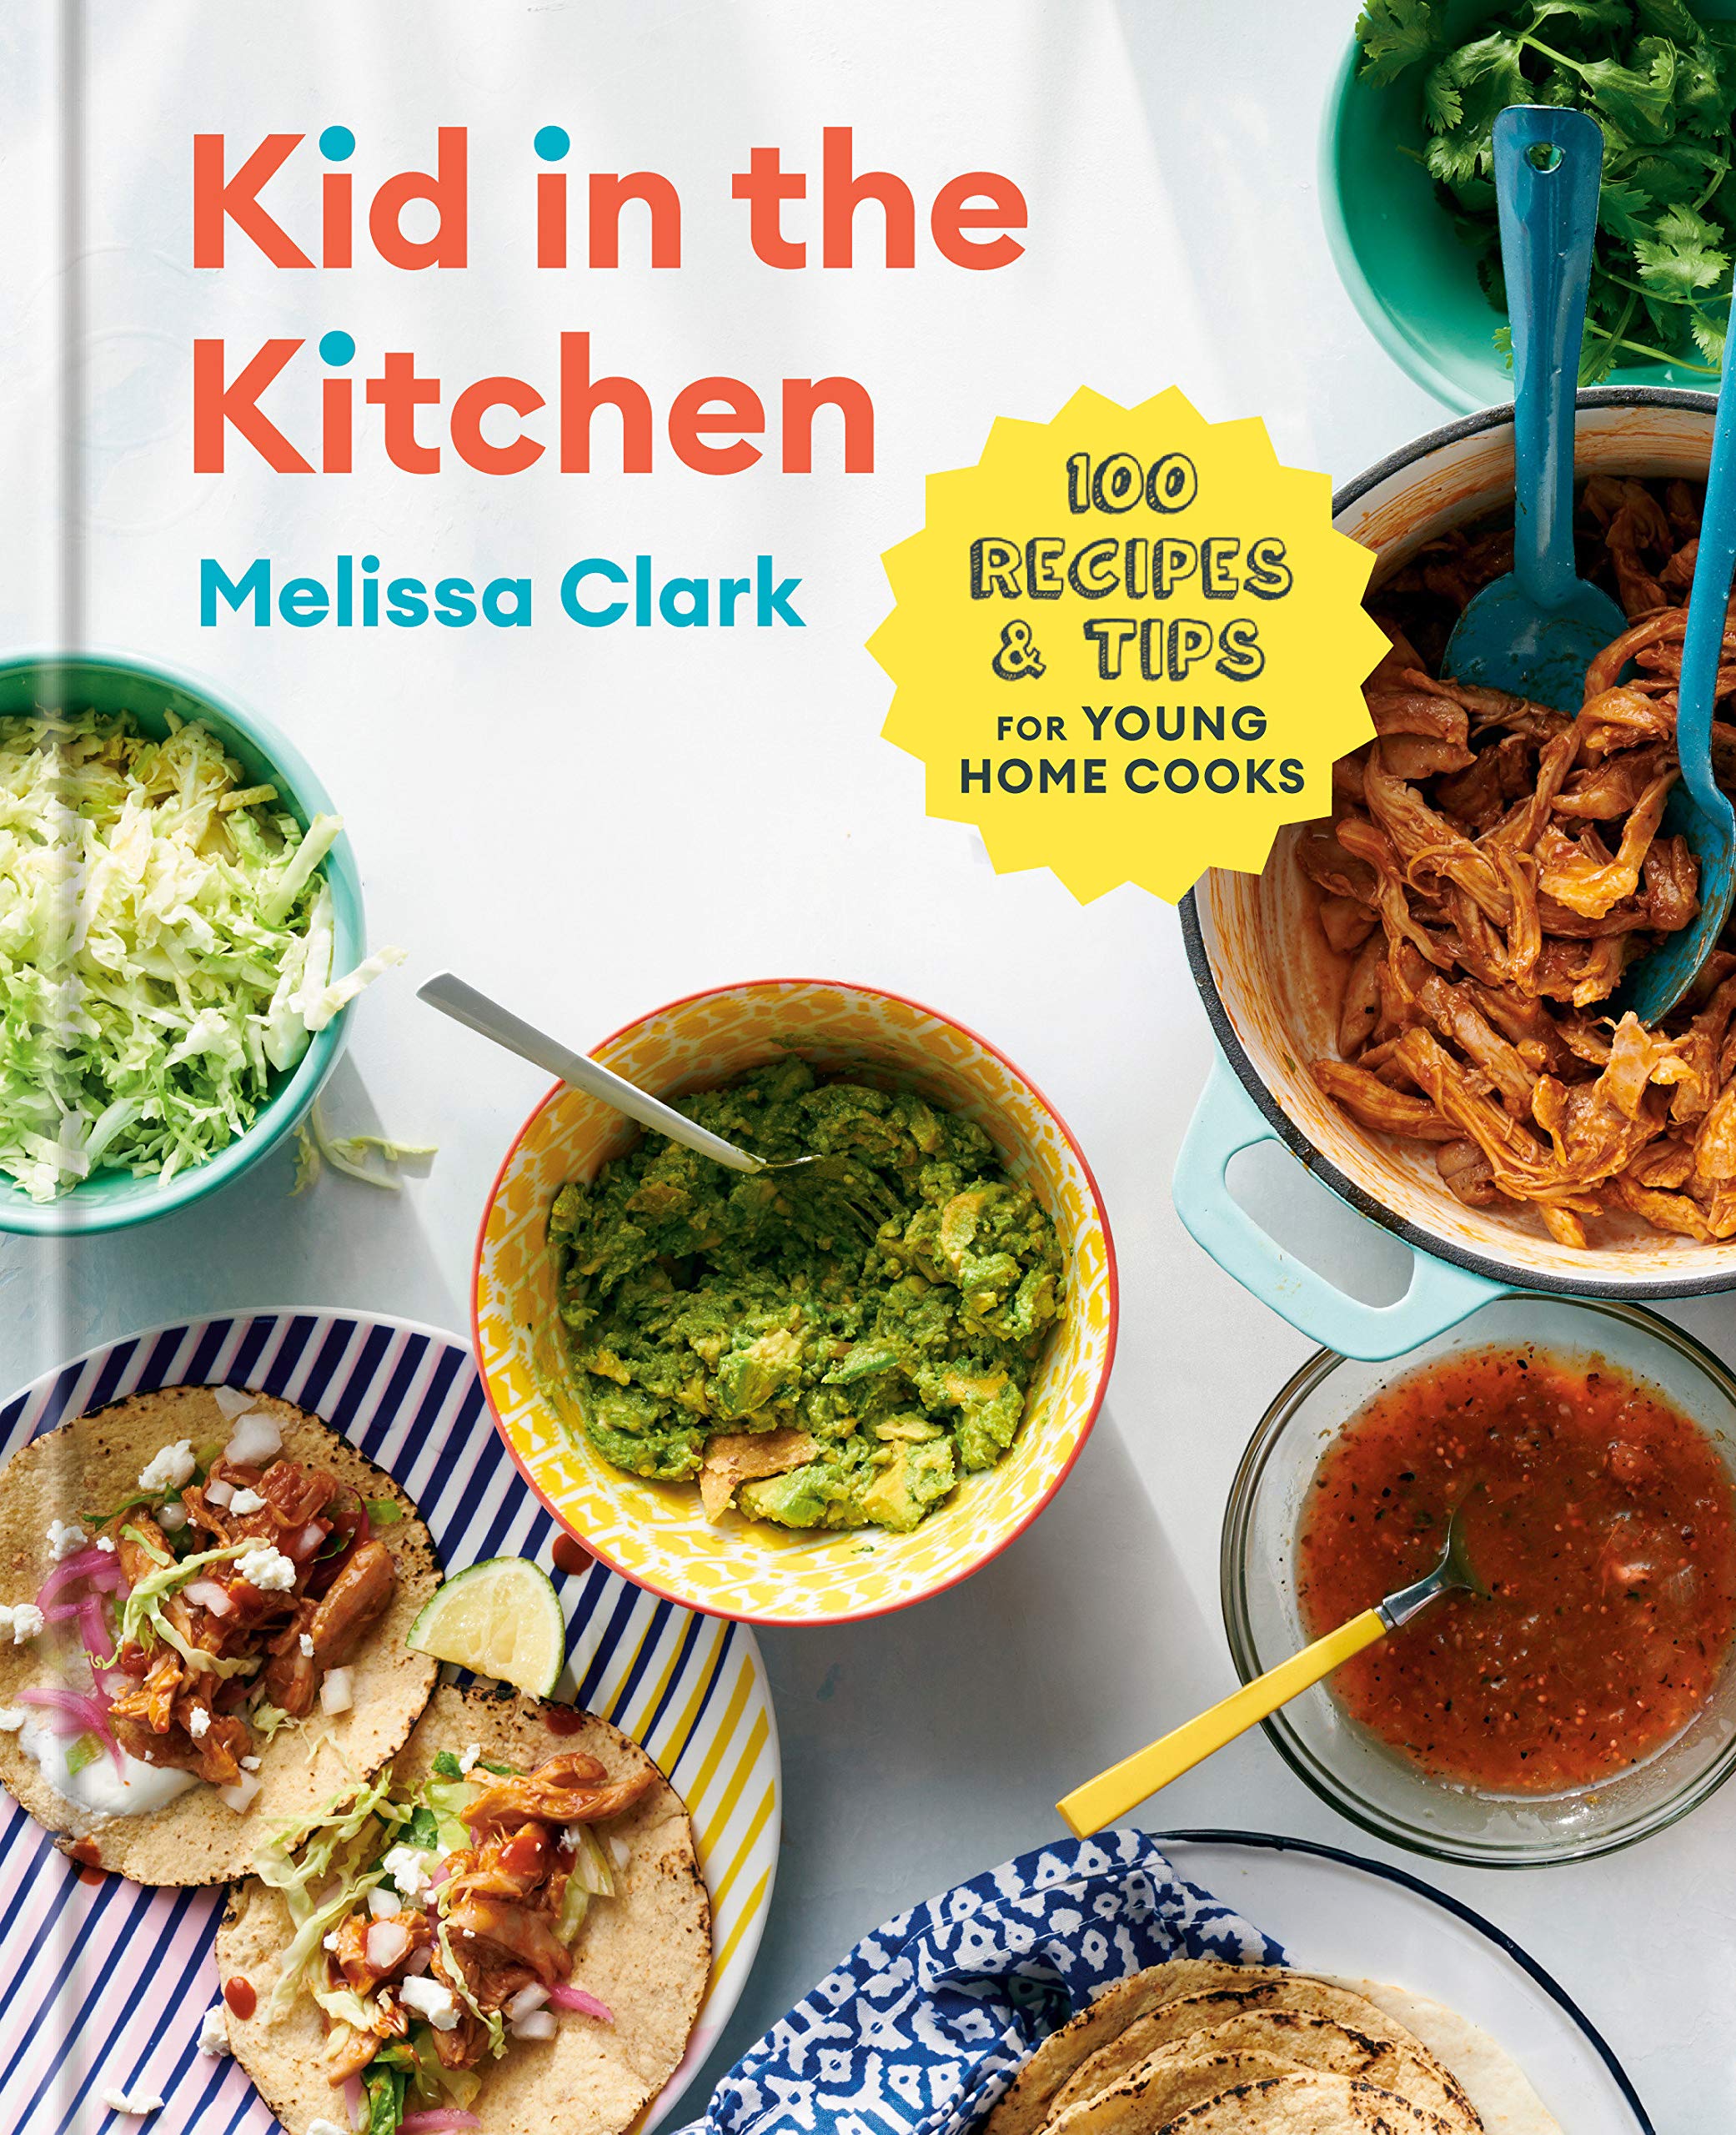 Kid in the Kitchen: 100 Recipes and Tips for Young Home Cooks (Melissa Clark)